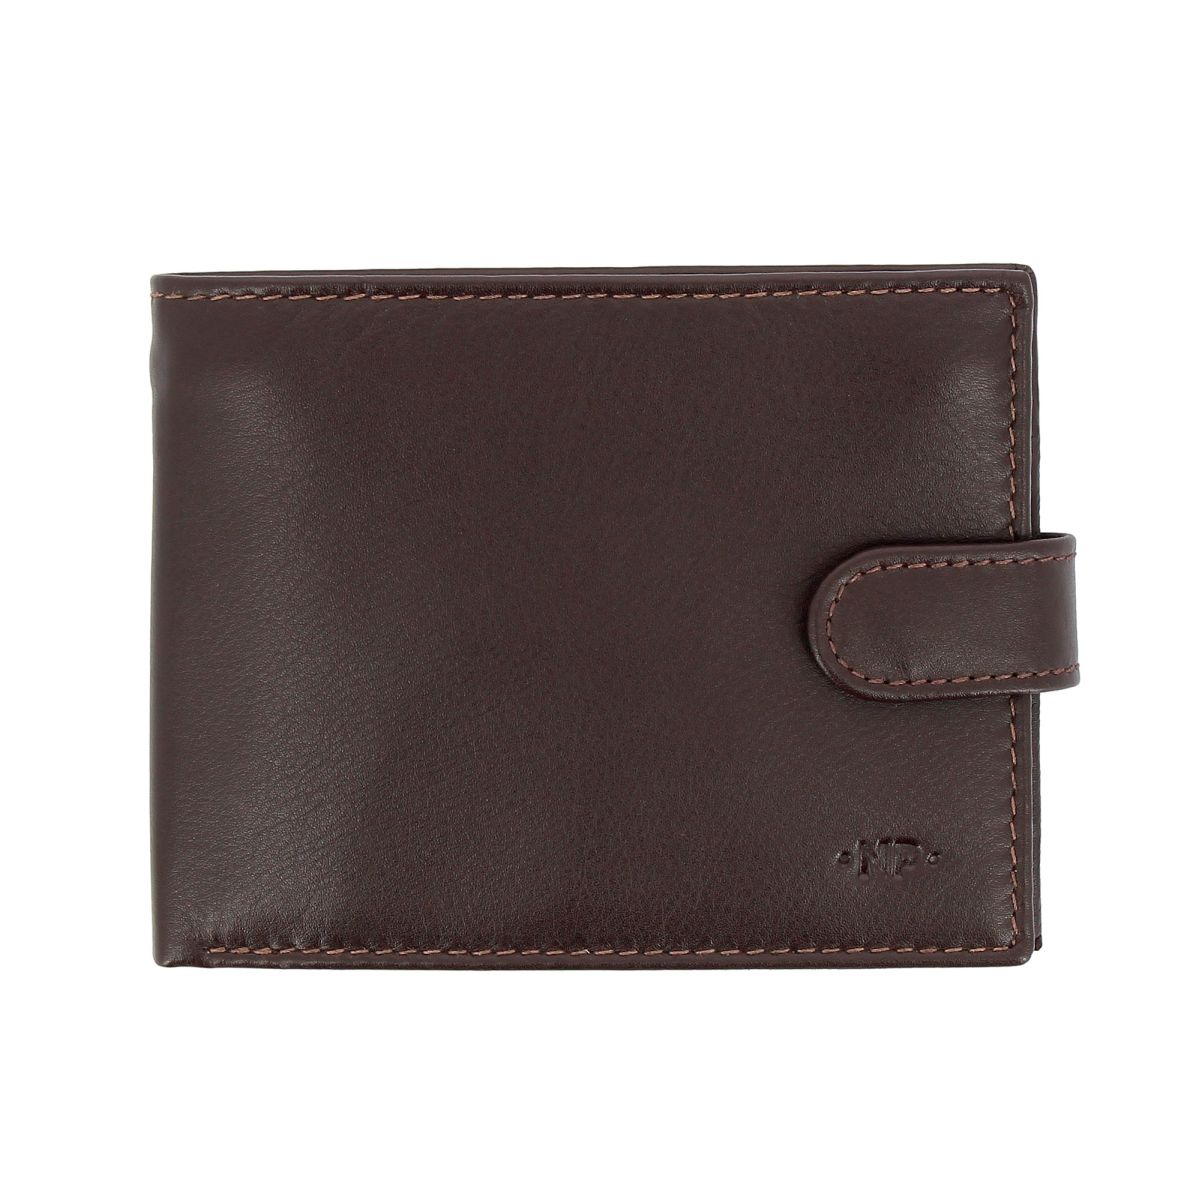 NUVOLA PELLE Mens Leather Wallet With Snap Button - Dark Brown